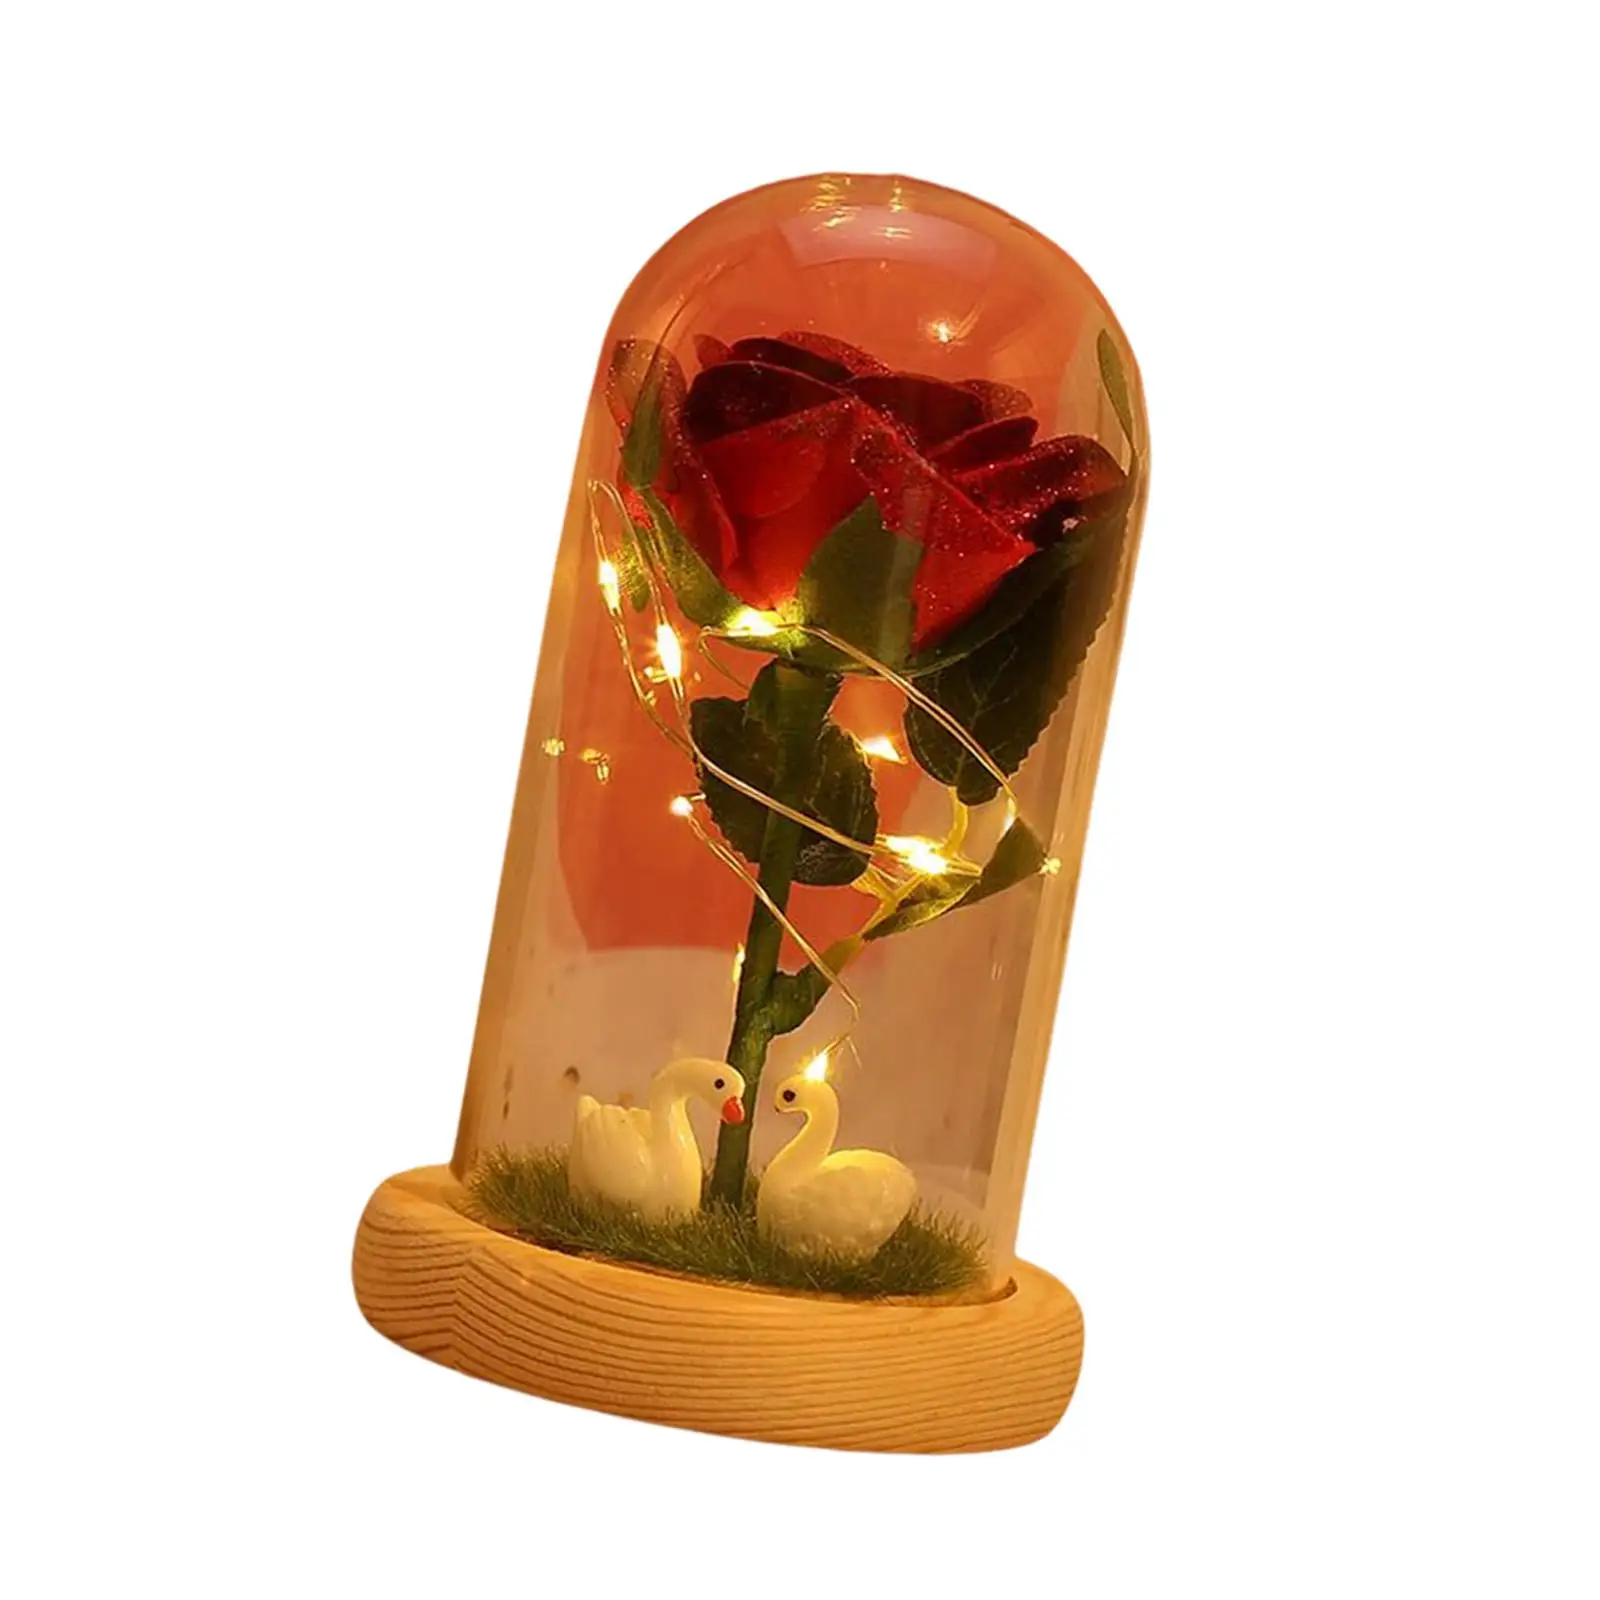 Unique Light up Rose Simulated Flowers W/ Light Artificial Flower Ornaments for Gift Girlfriend Home Decoration Women